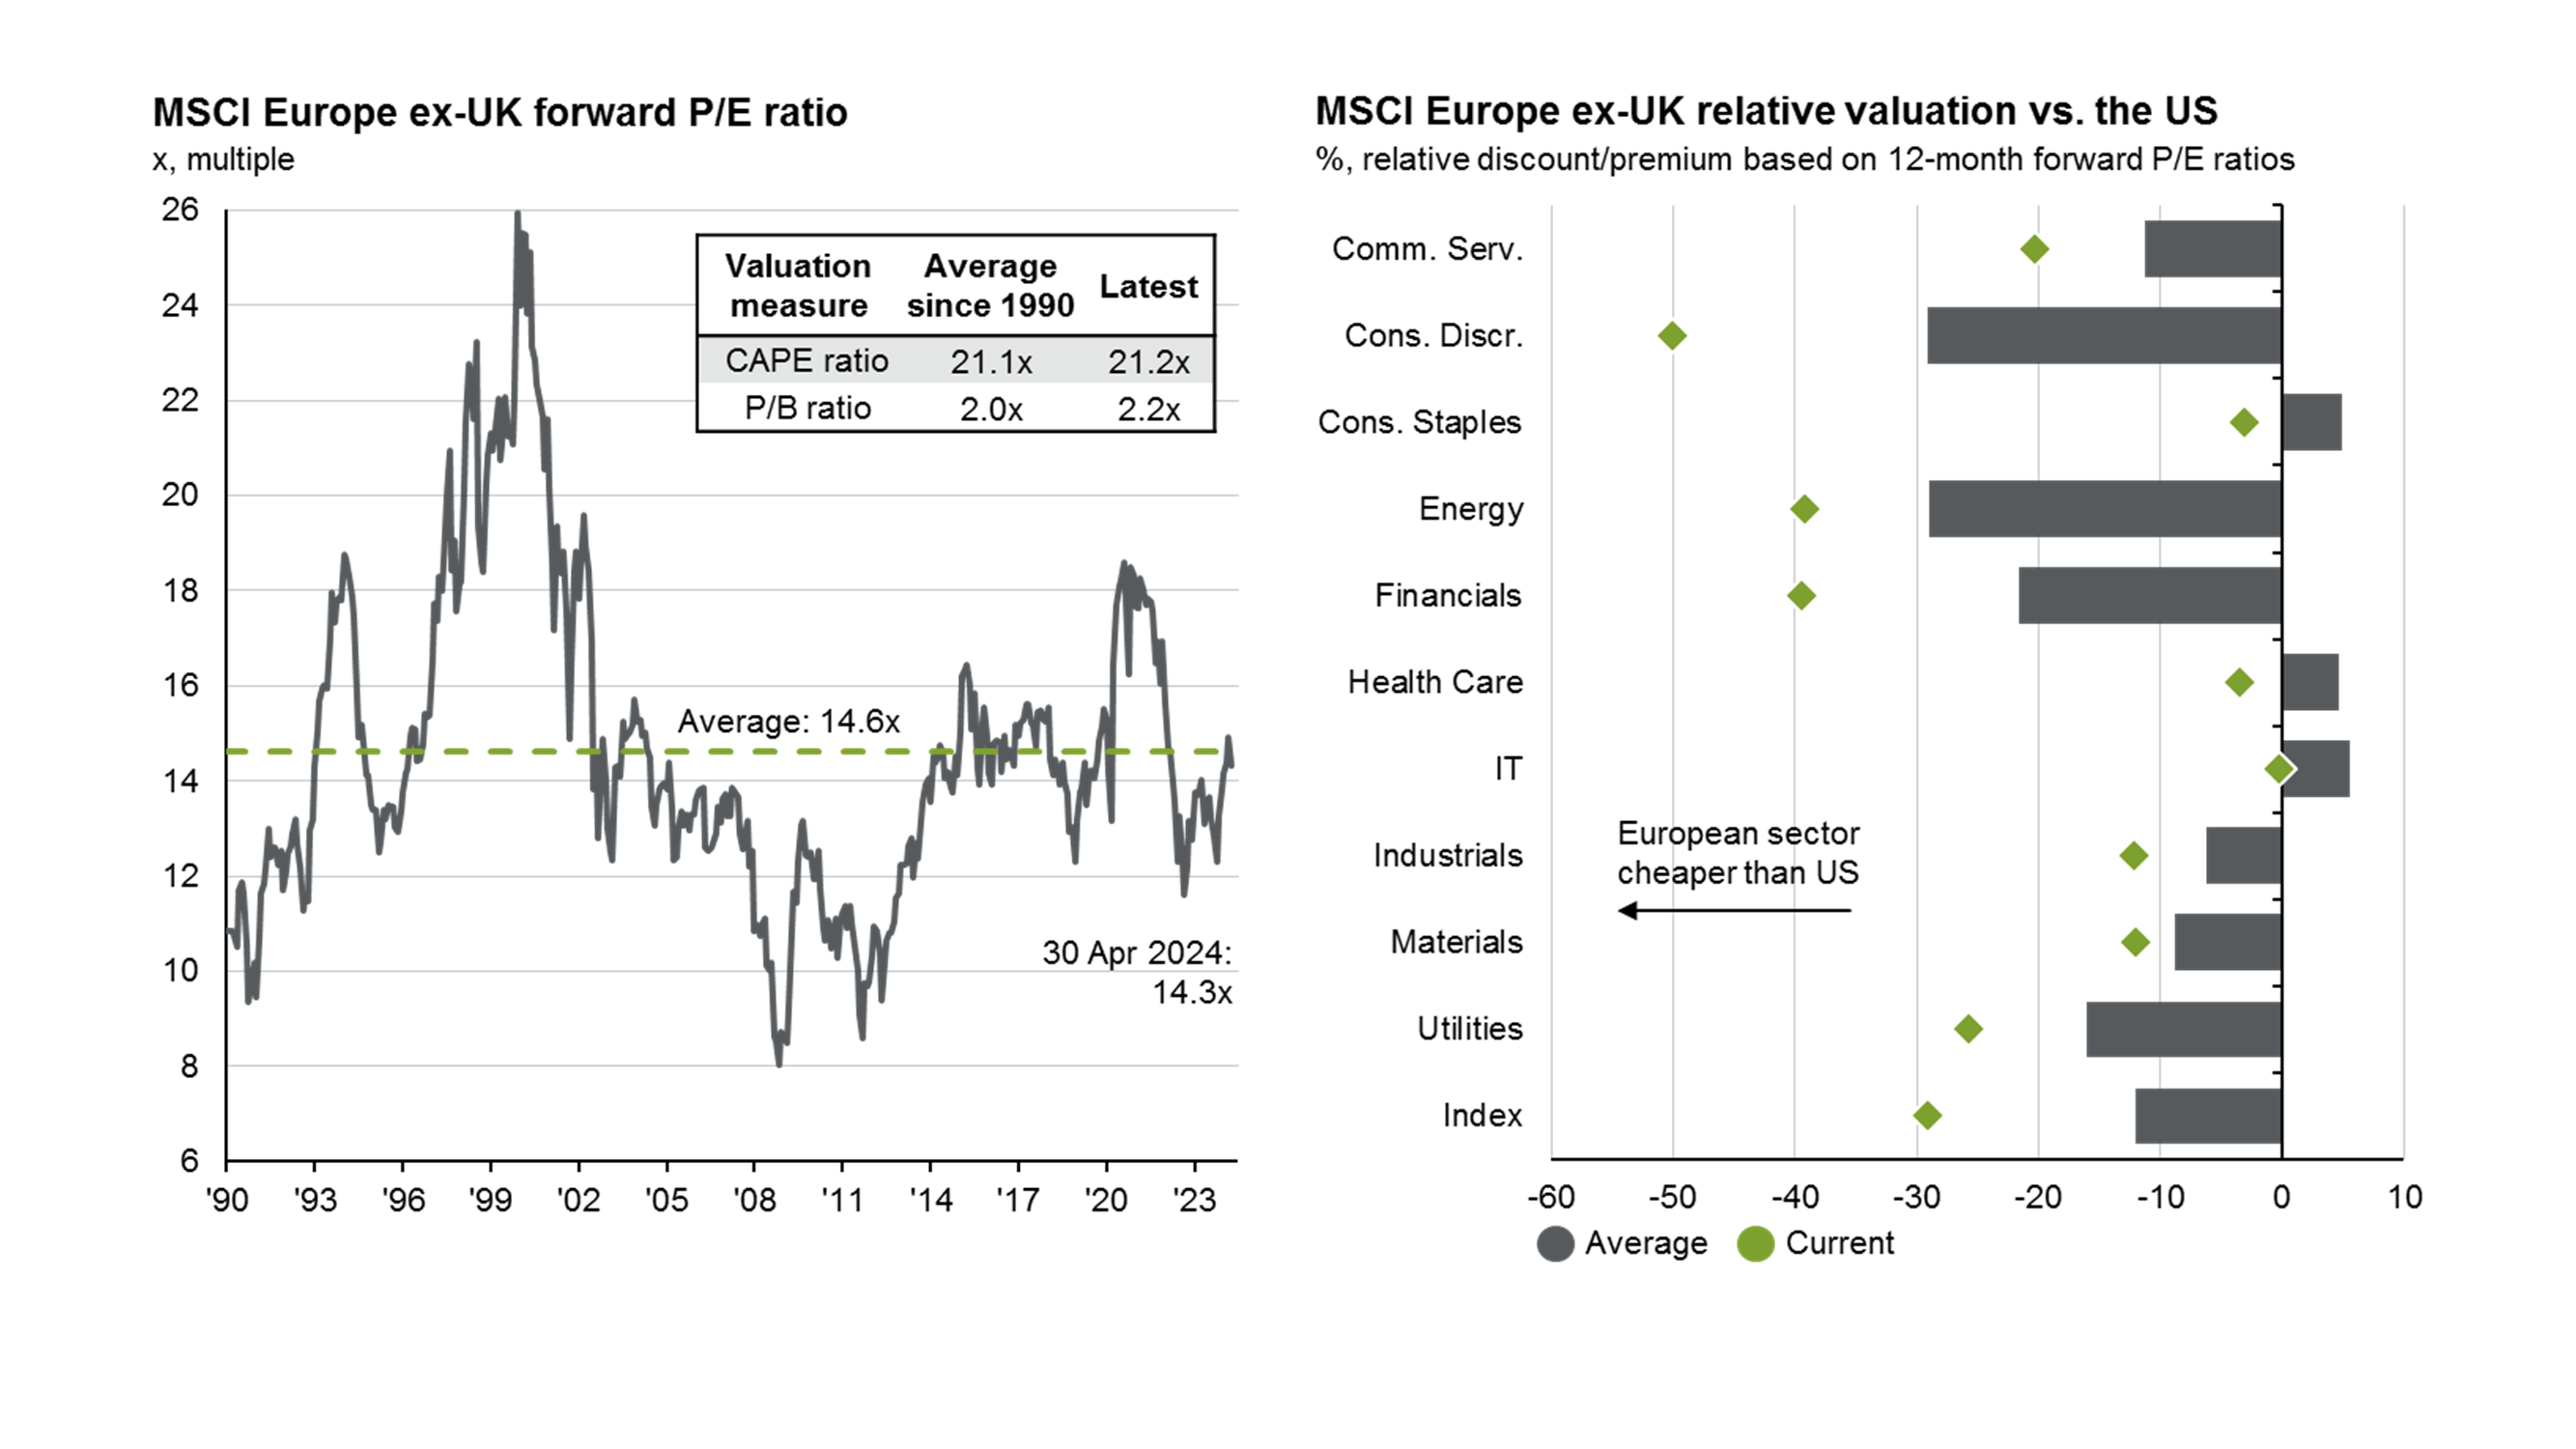 Europe ex-UK equity valuations and performance